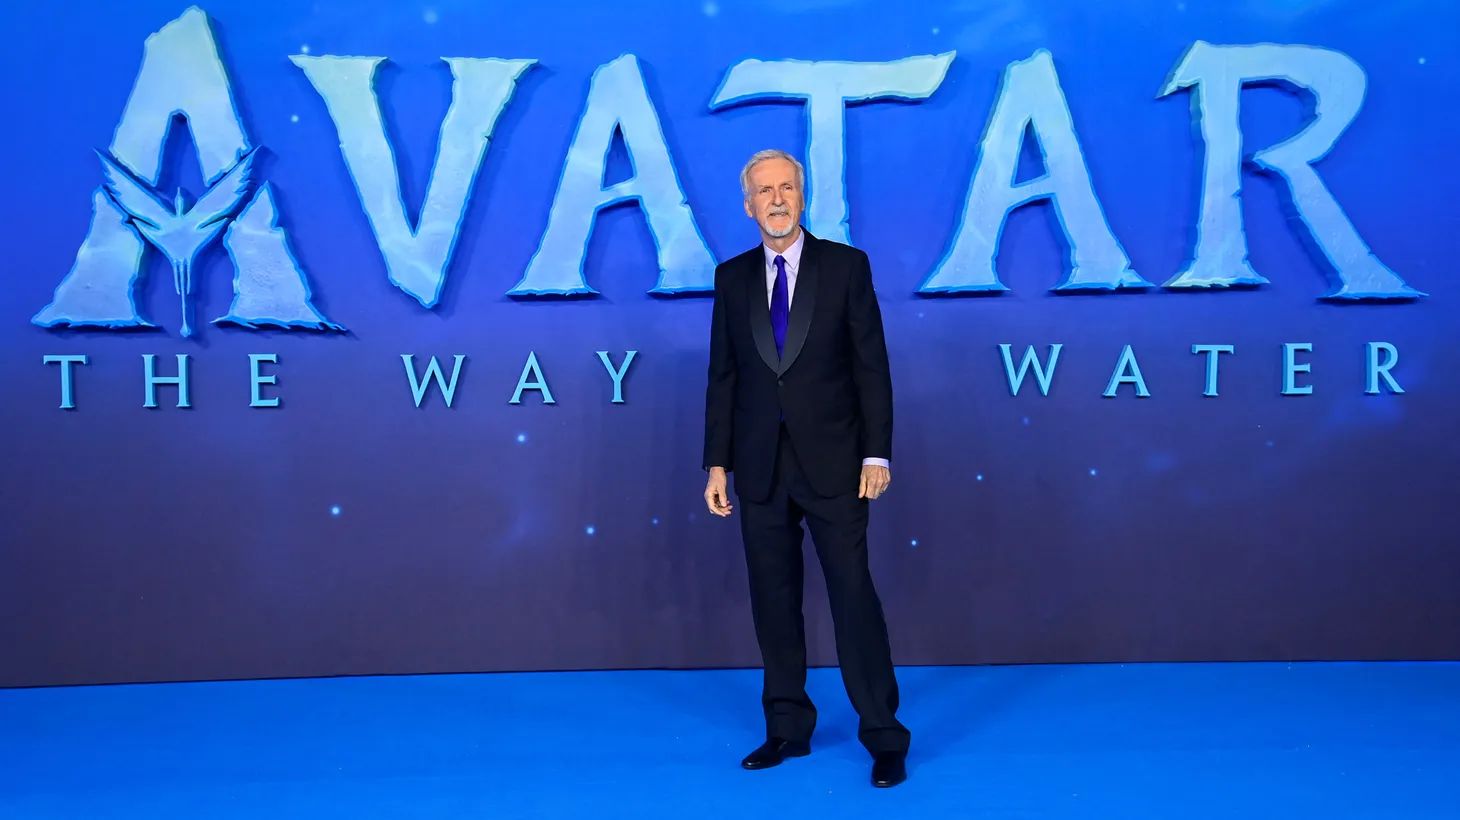 Director James Cameron arrives at the world premiere of “Avatar: The Way of Water” in London, on December 6, 2022.